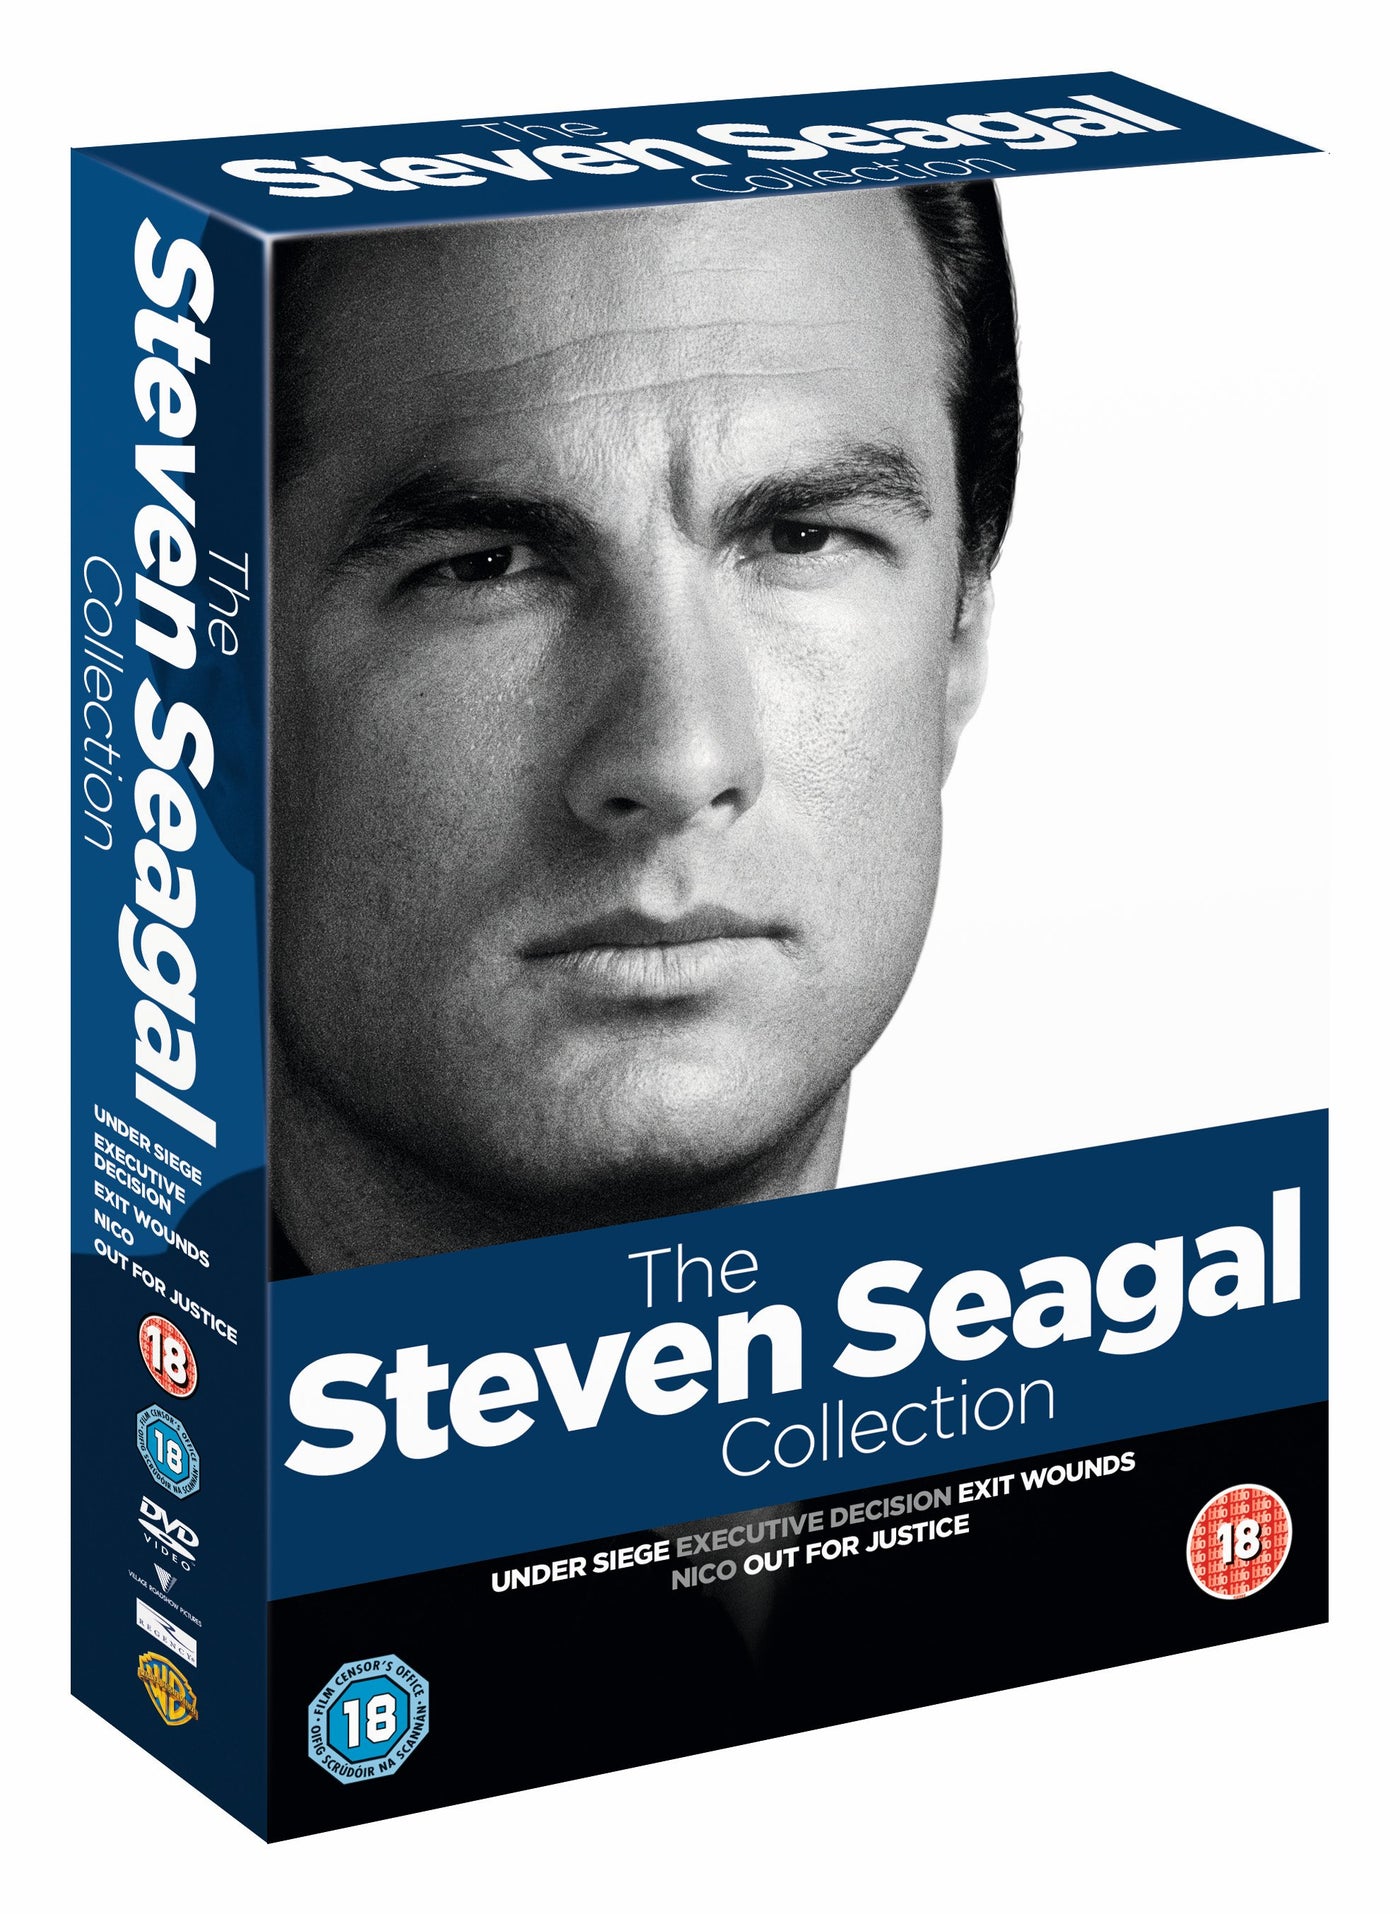 Steven Seagal Legacy 2011 - Under Siege / Executive Decision / Exit Wounds / Nico / Out For Justice (DVD)